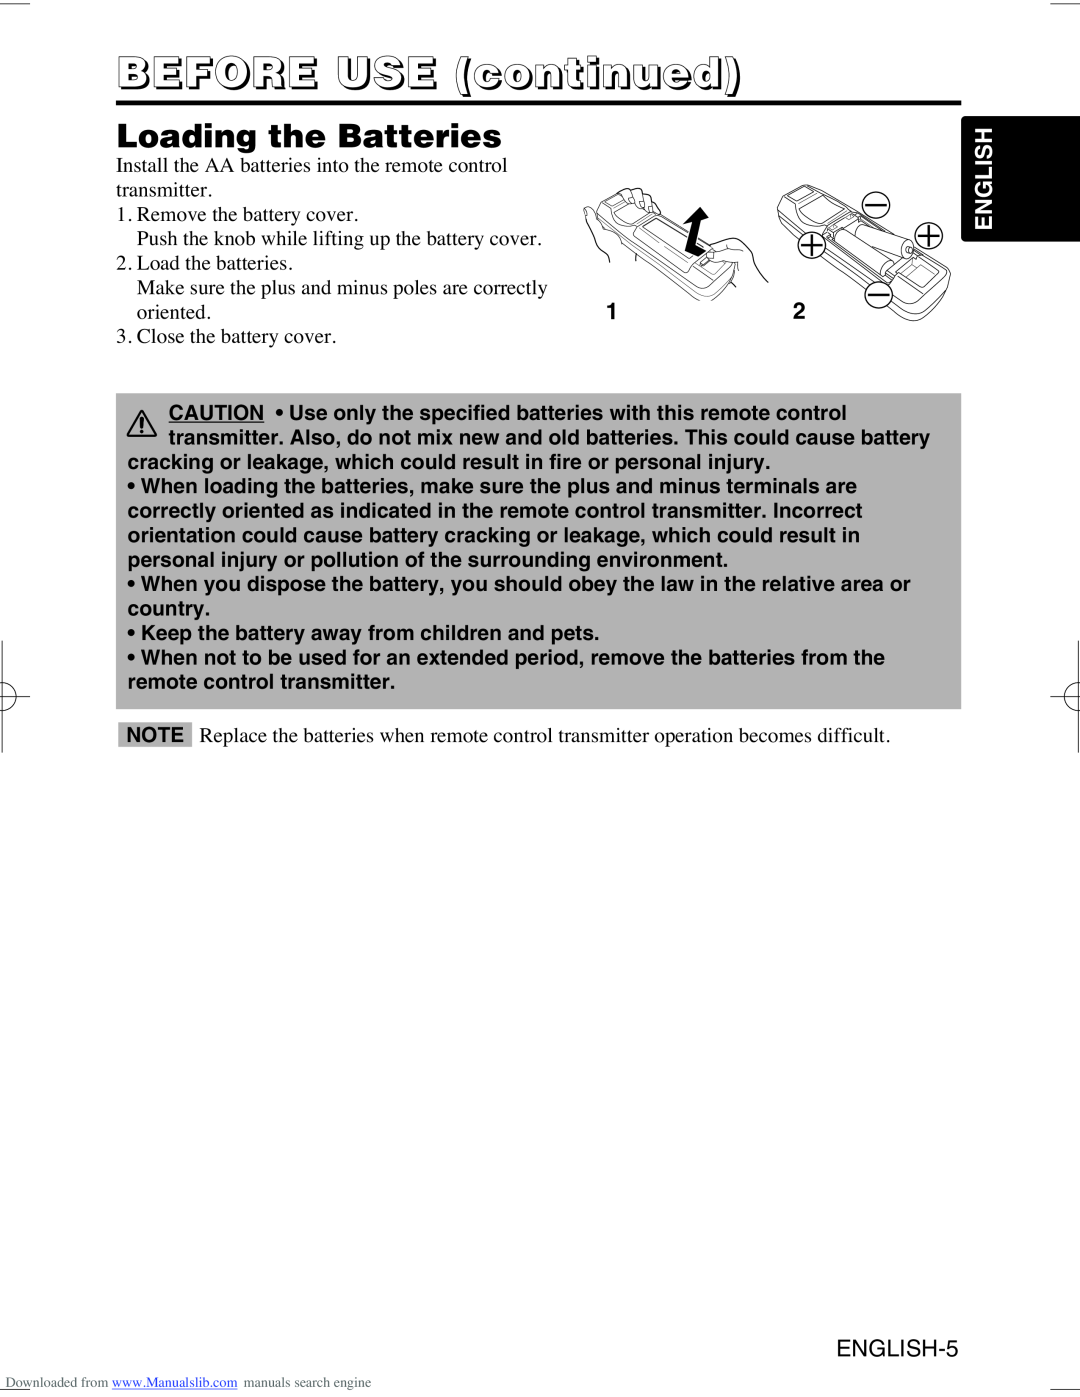 Hitachi CP-X995W user manual Loading the Batteries, BEFORE USE continued, English, ENGLISH-5 